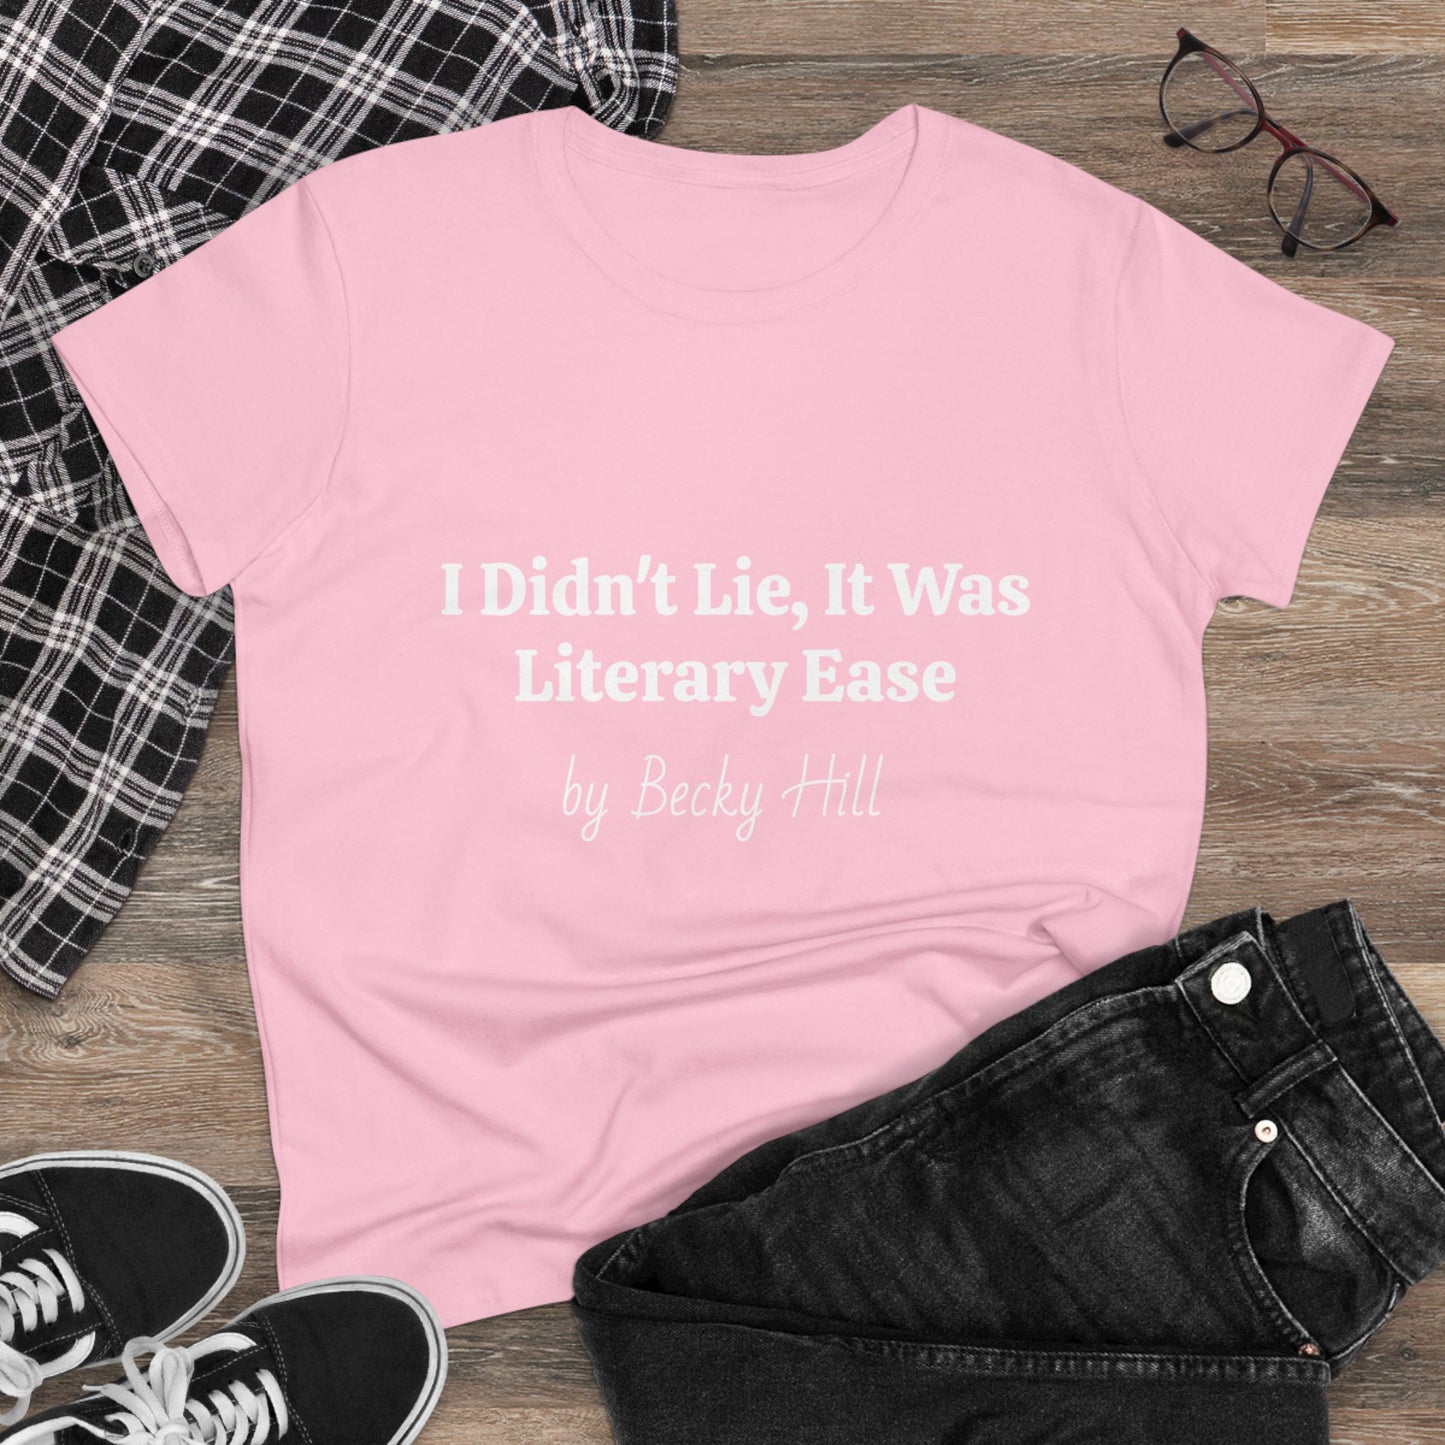 I Didn't Lie, It Was Literary Ease by Becky Hill